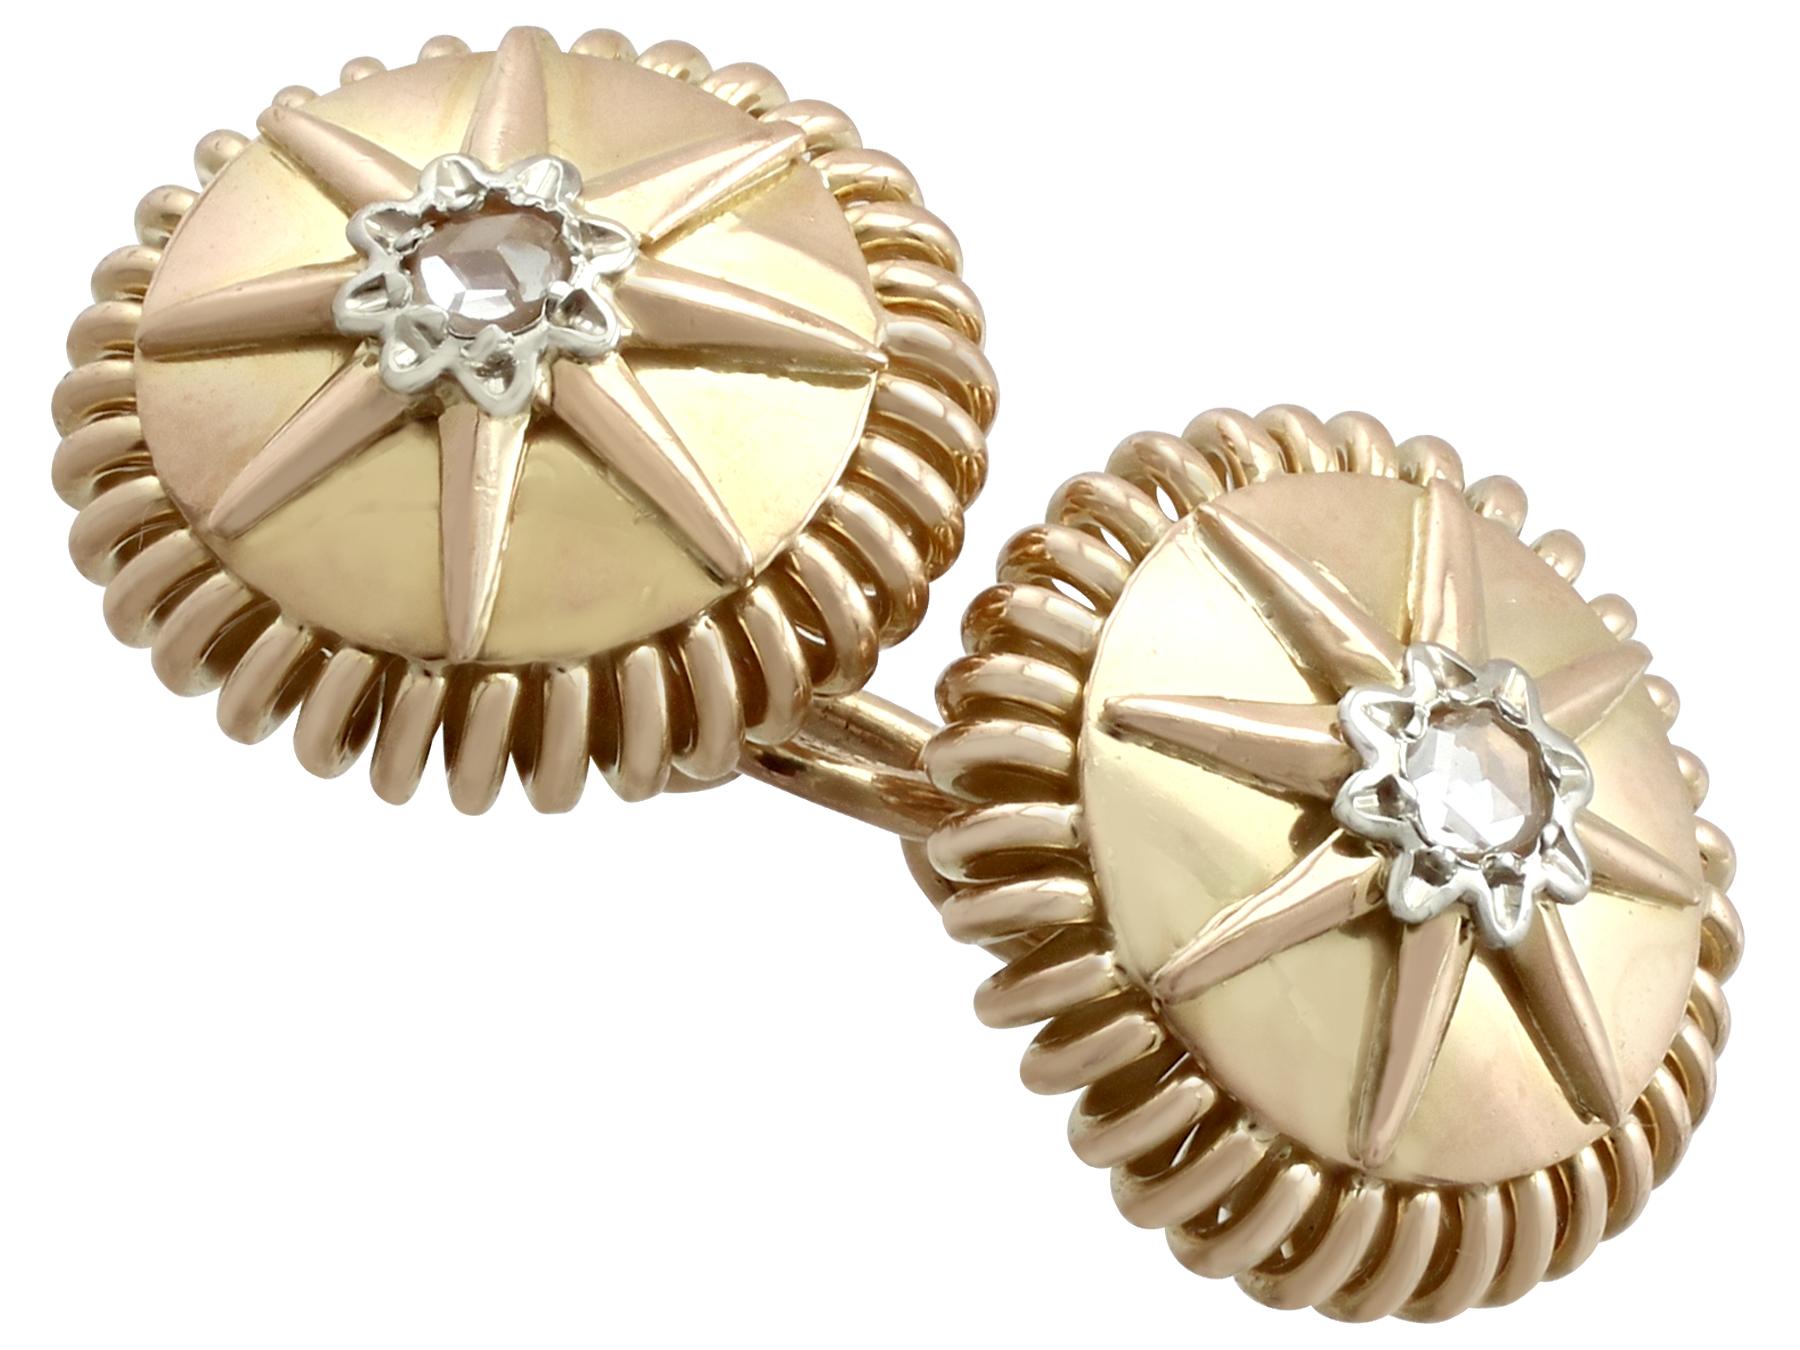 An impressive pair of antique 0.12 carat diamond and 18 karat yellow gold, 18 carat white gold cufflinks; part of our diverse antique jewelry and estate jewelry collections.

These fine and impressive antique cufflinks have been crafted in 18k